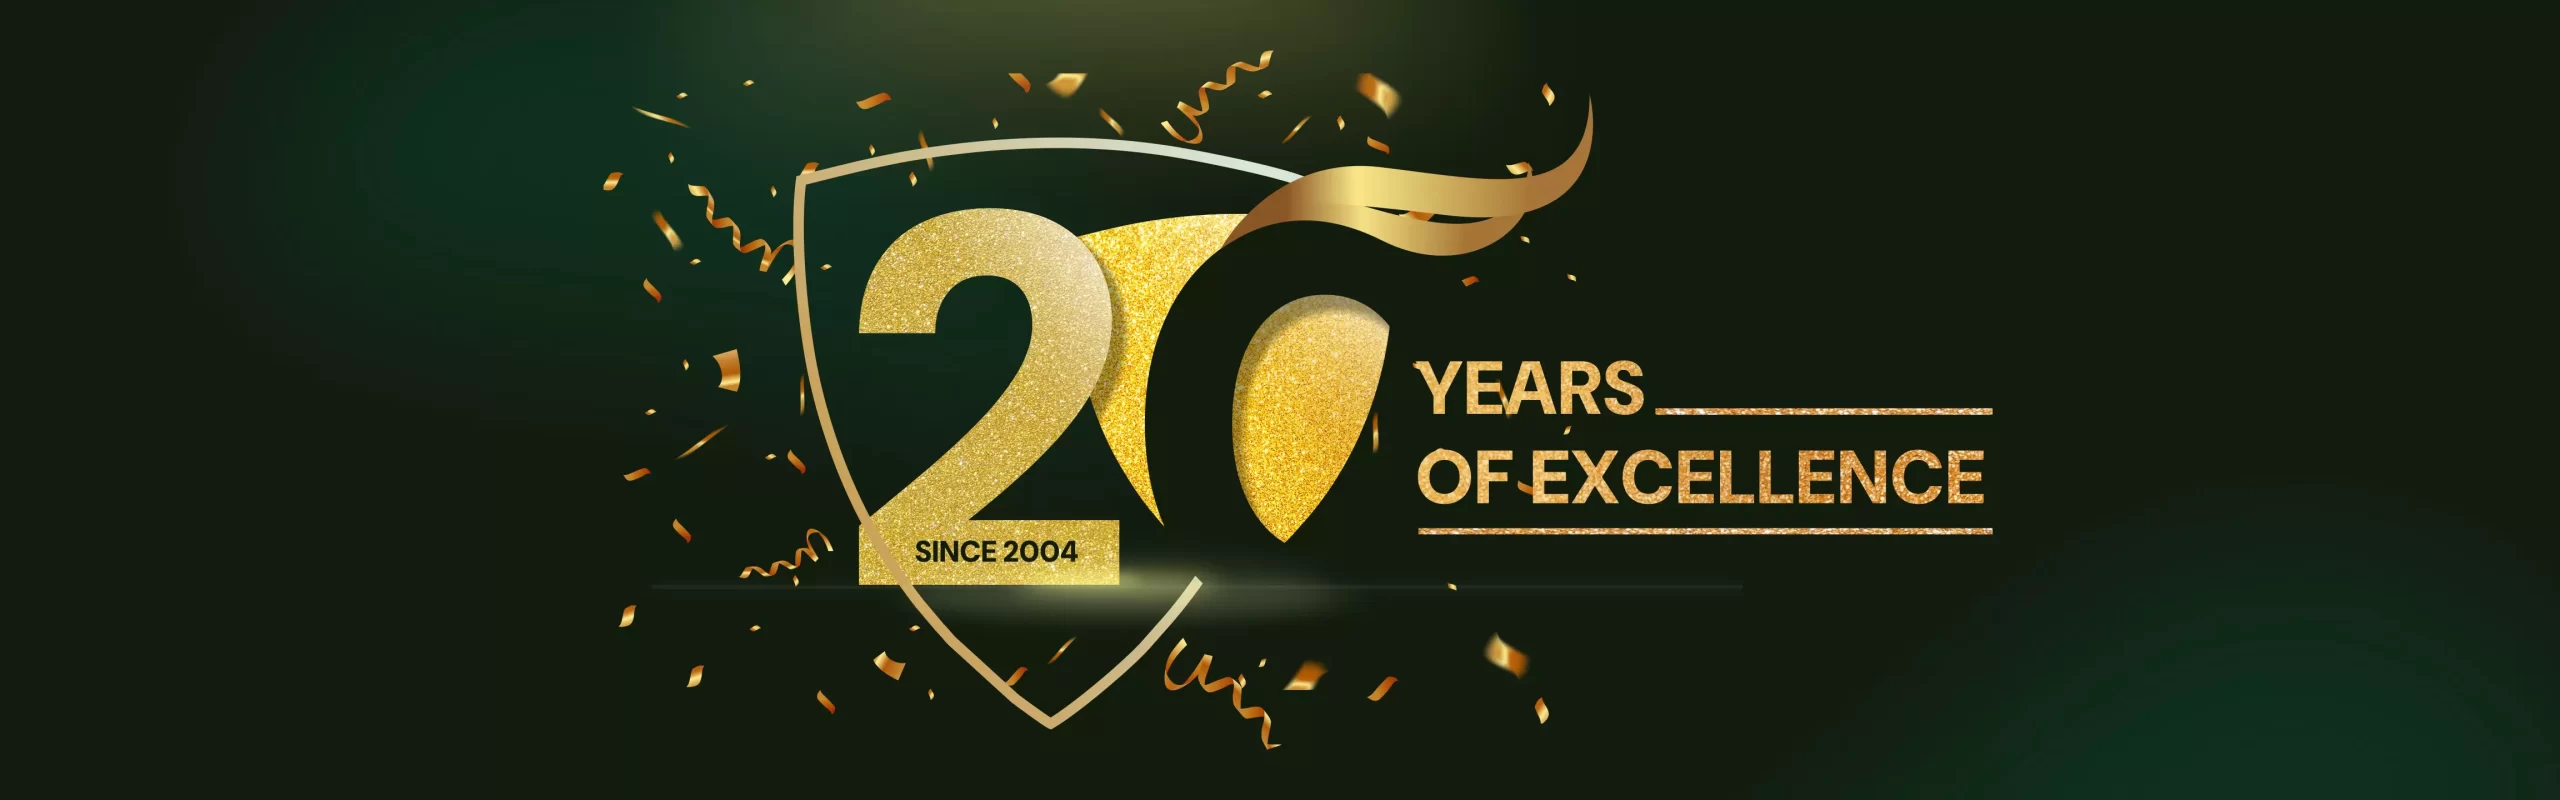 20 Years of Excellence Website Slider Banner scaled